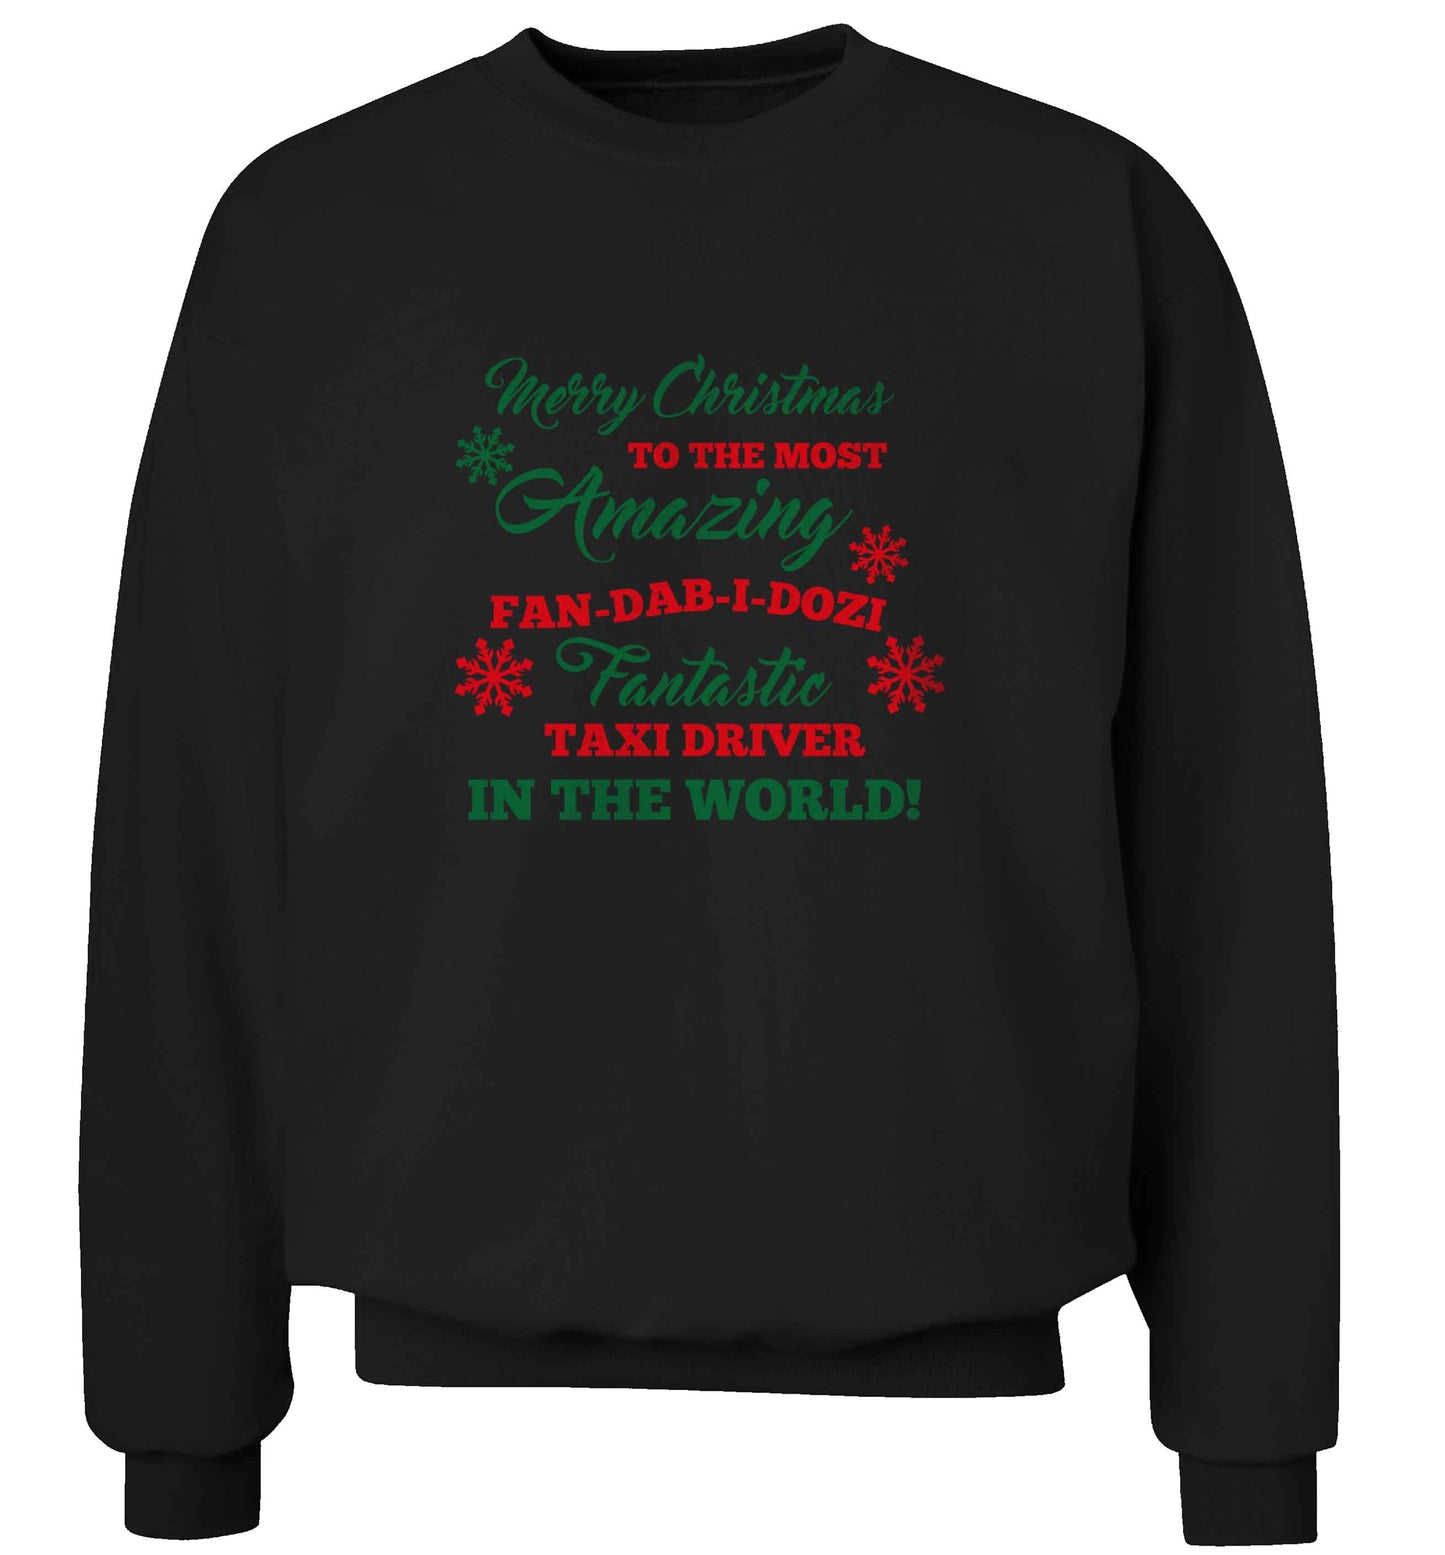 Merry Christmas to the most amazing taxi driver in the world! adult's unisex black sweater 2XL